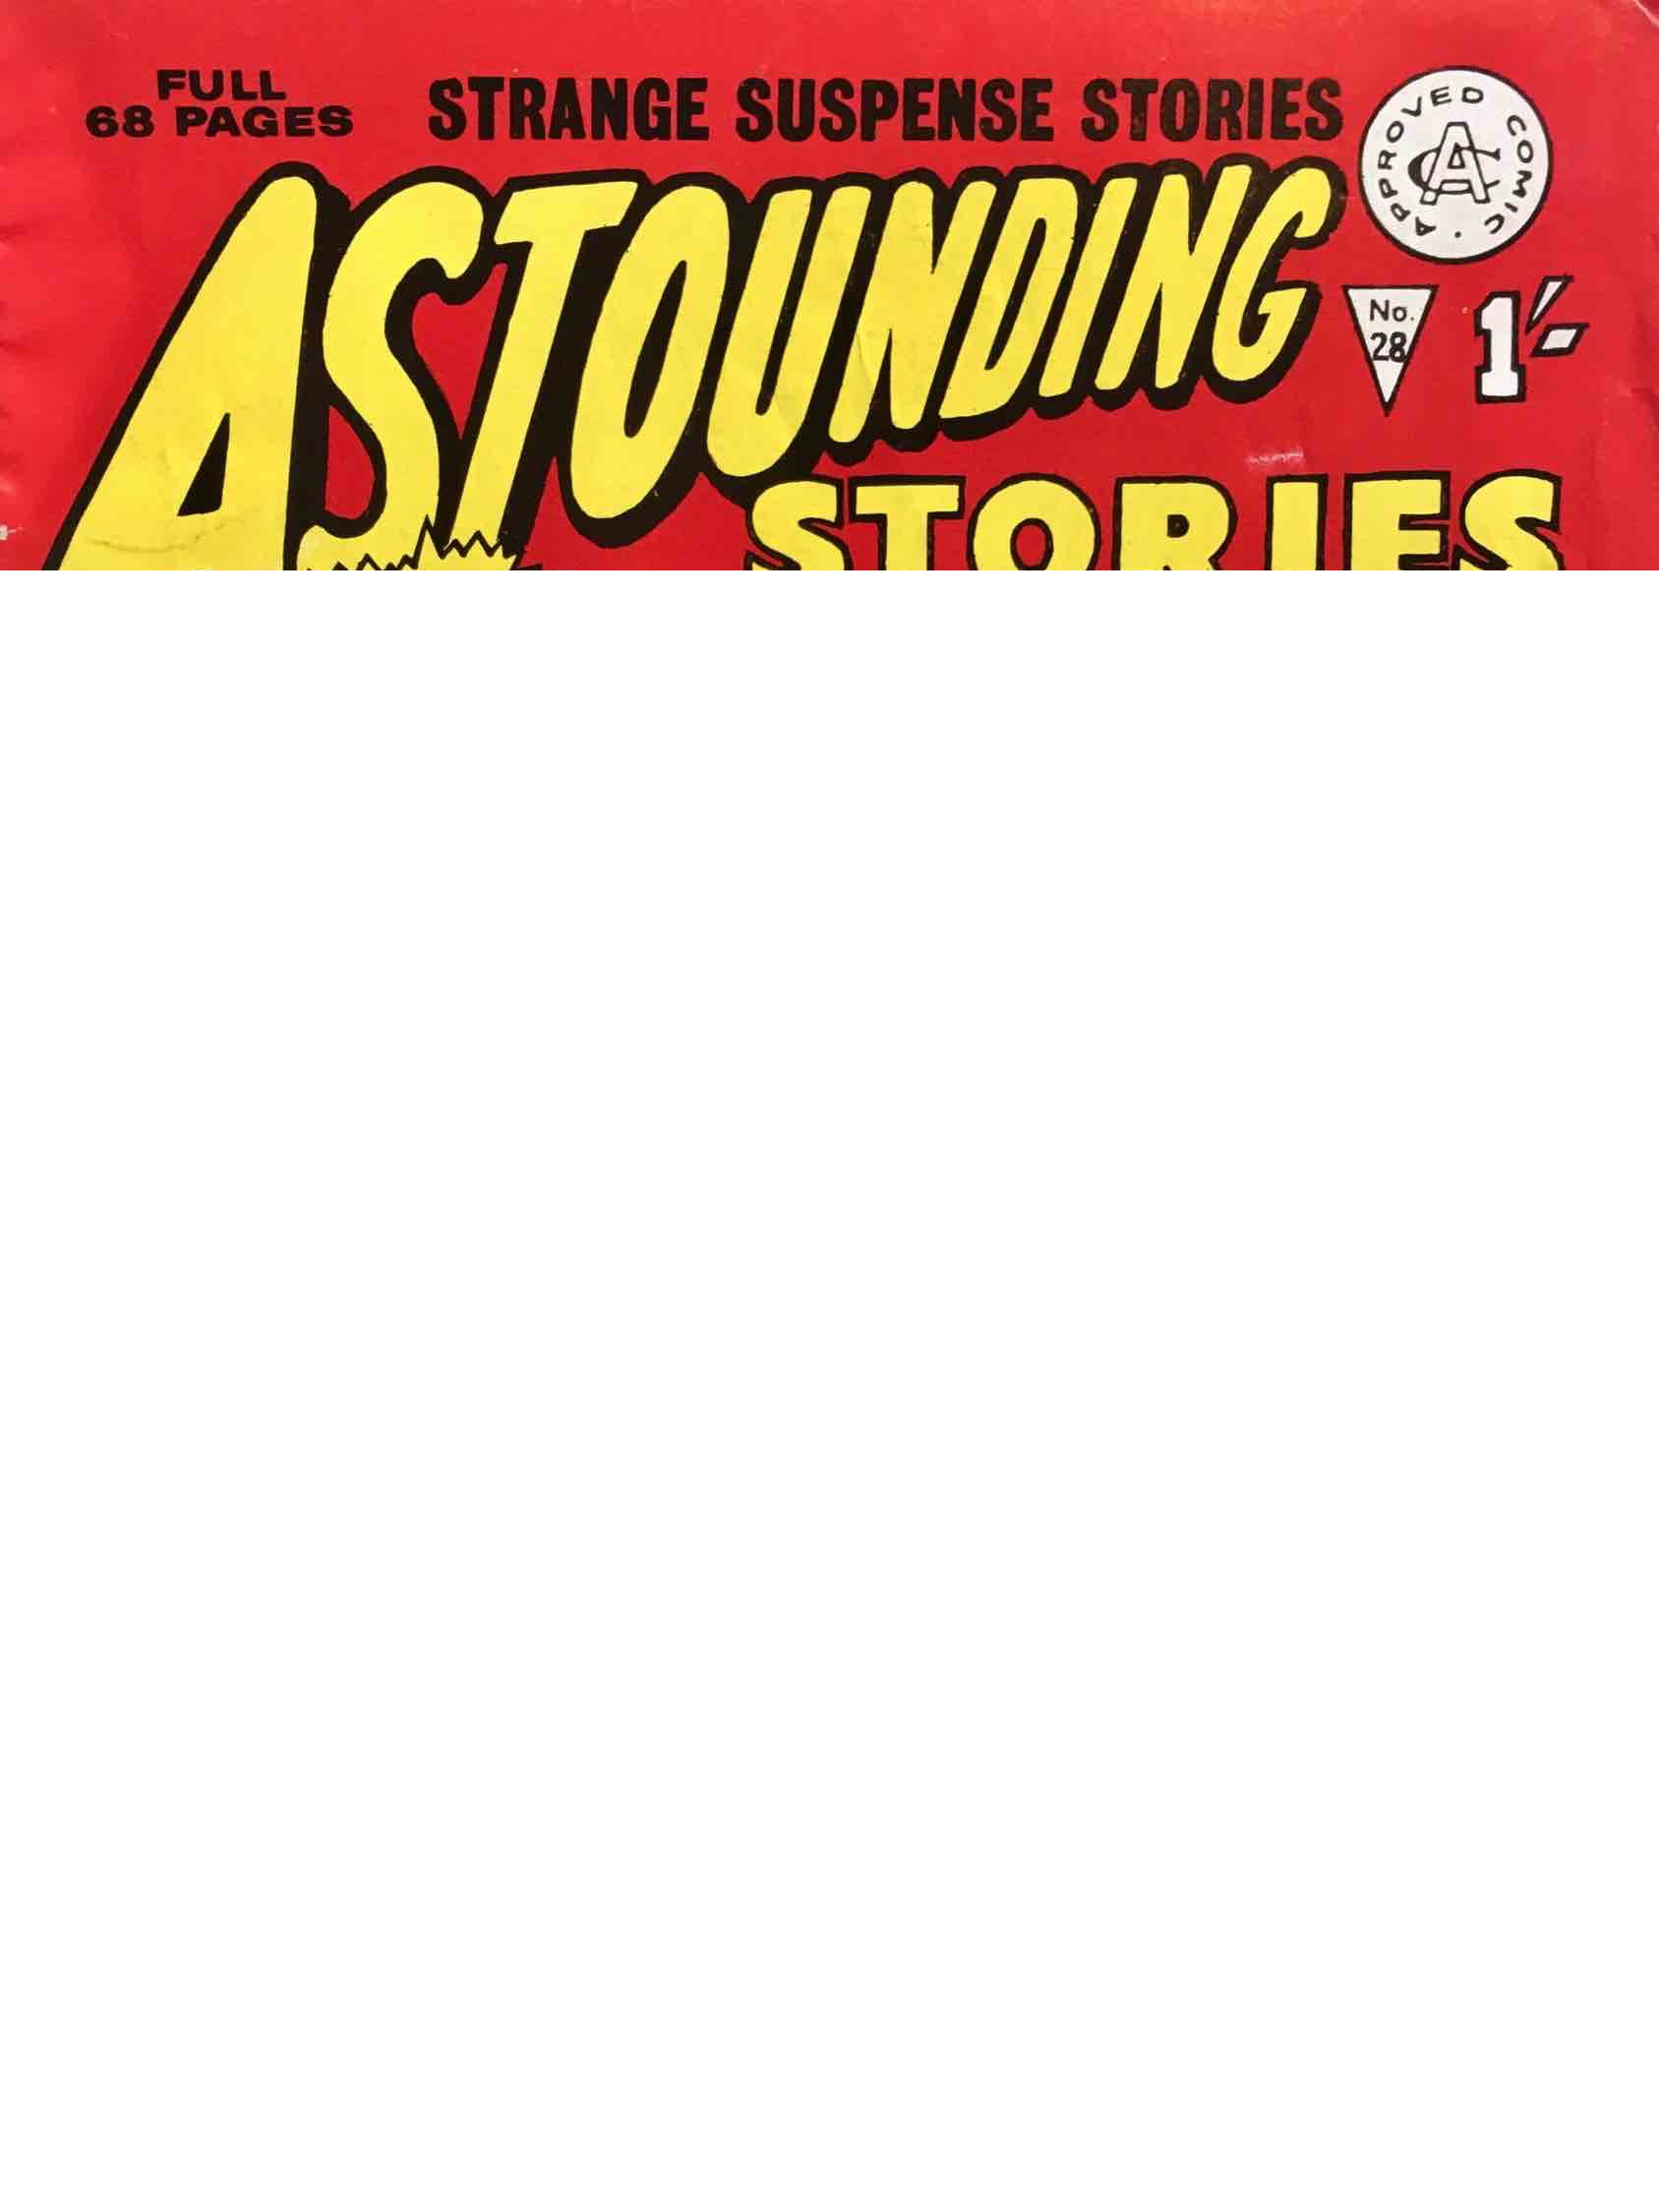 Book Cover For Astounding Stories 27